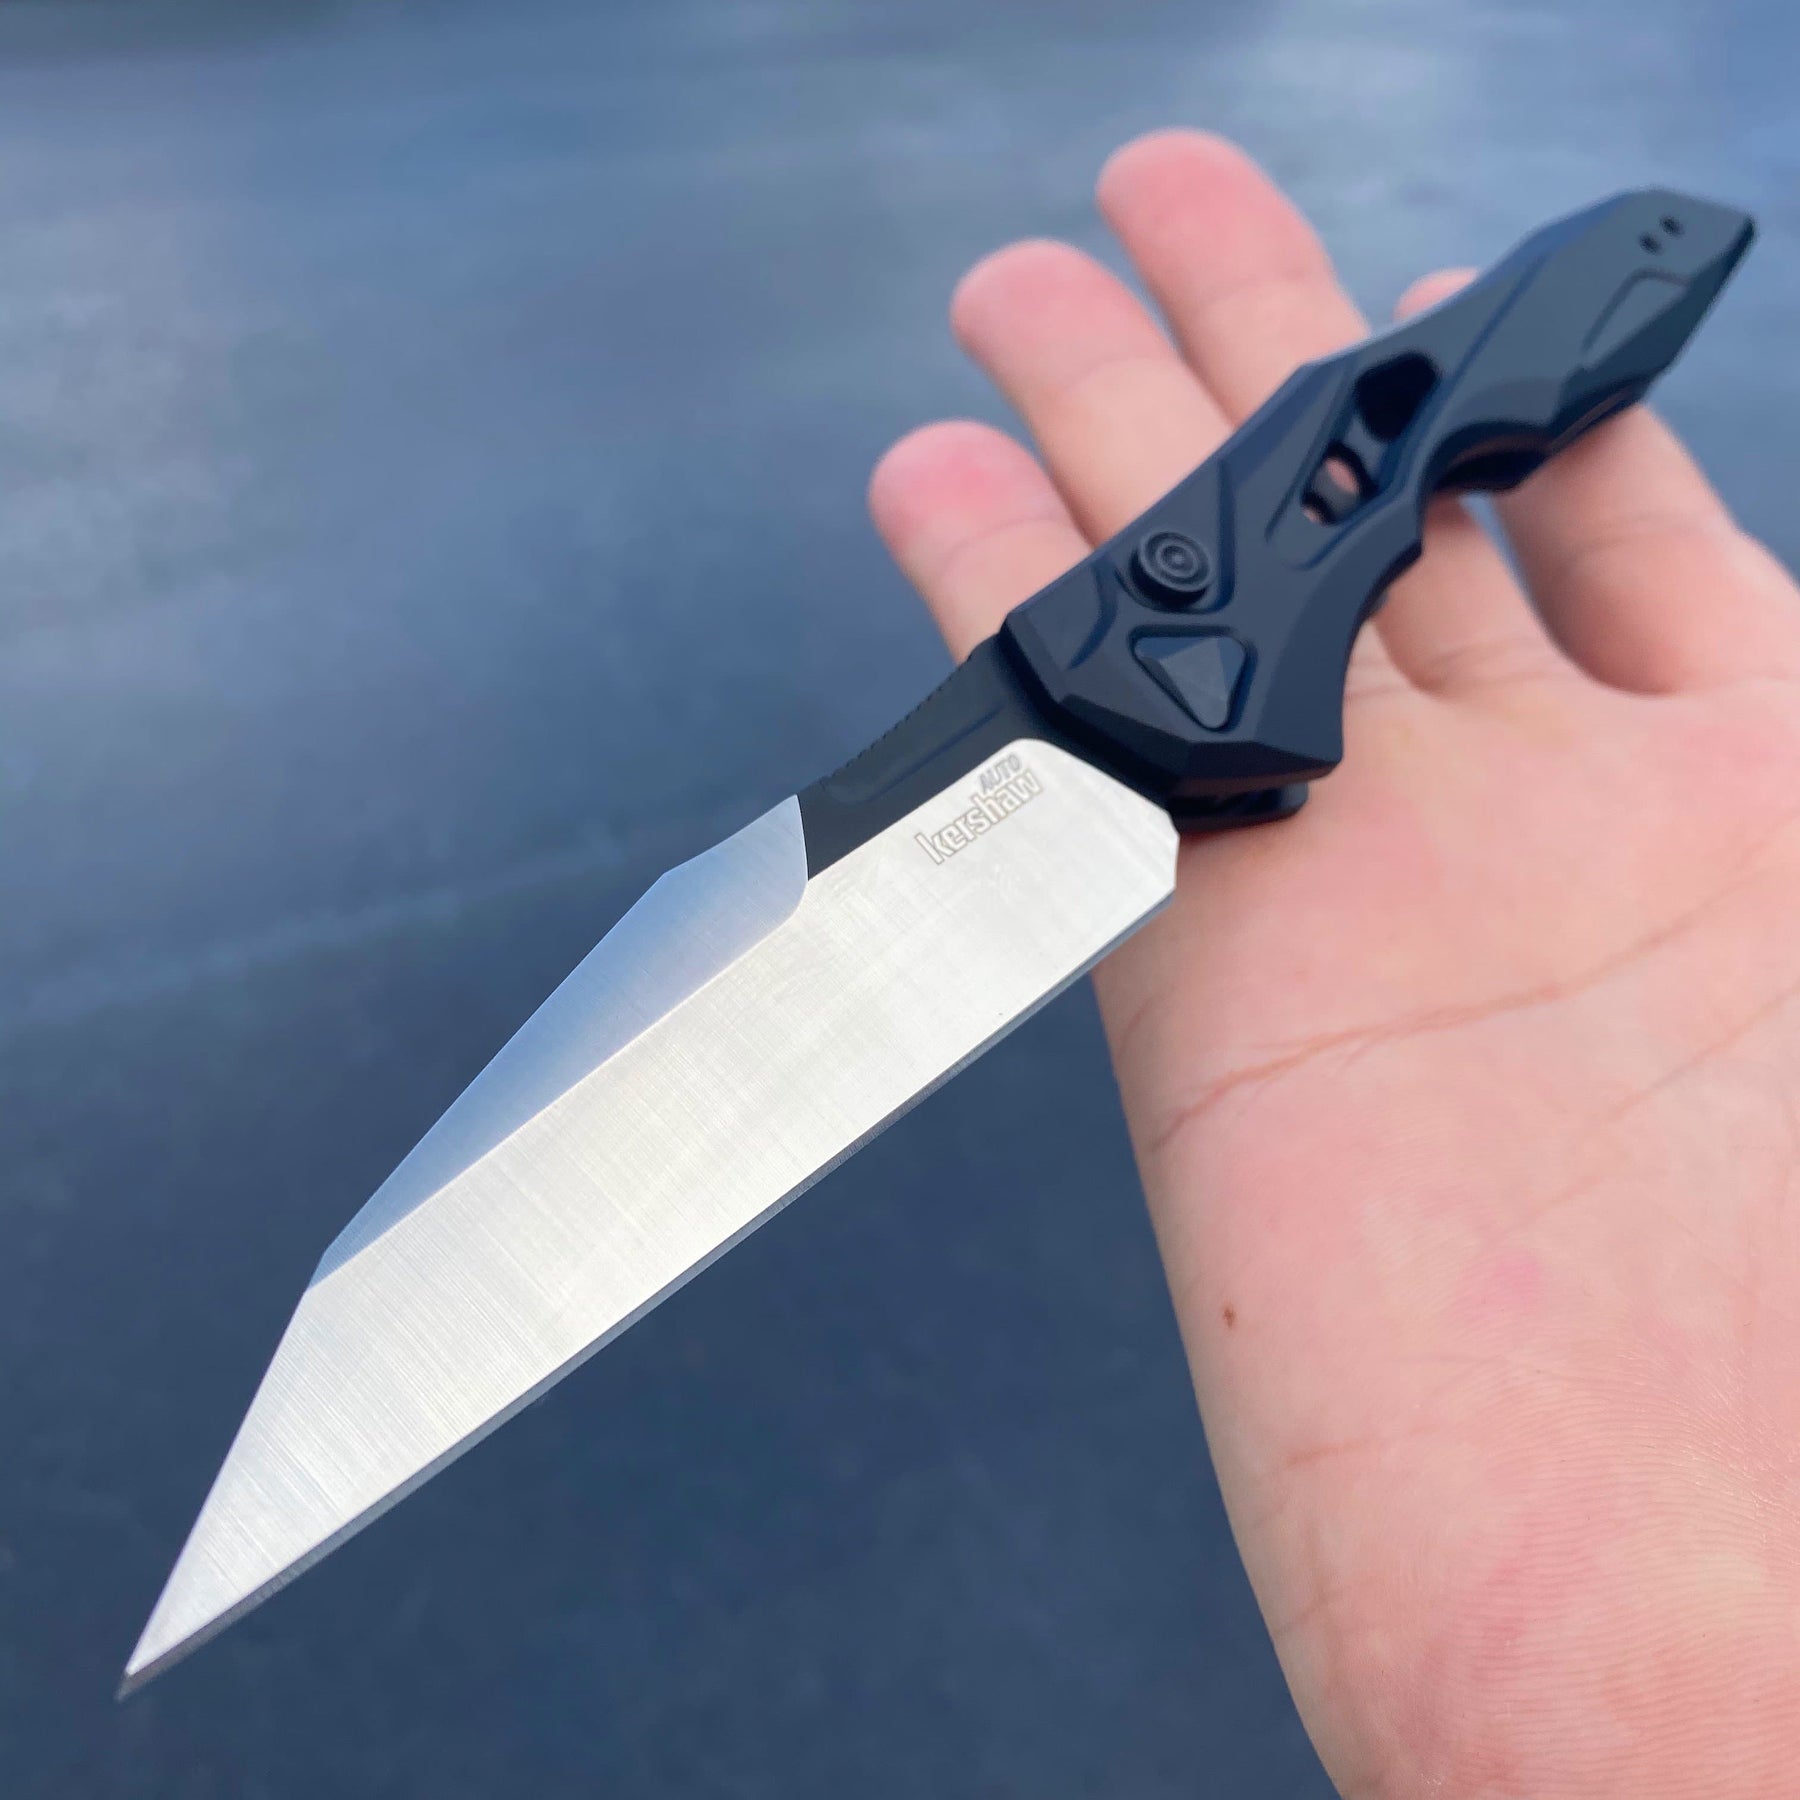 Kershaw Launch 13 Review: This Auto Makes Its Own Luck